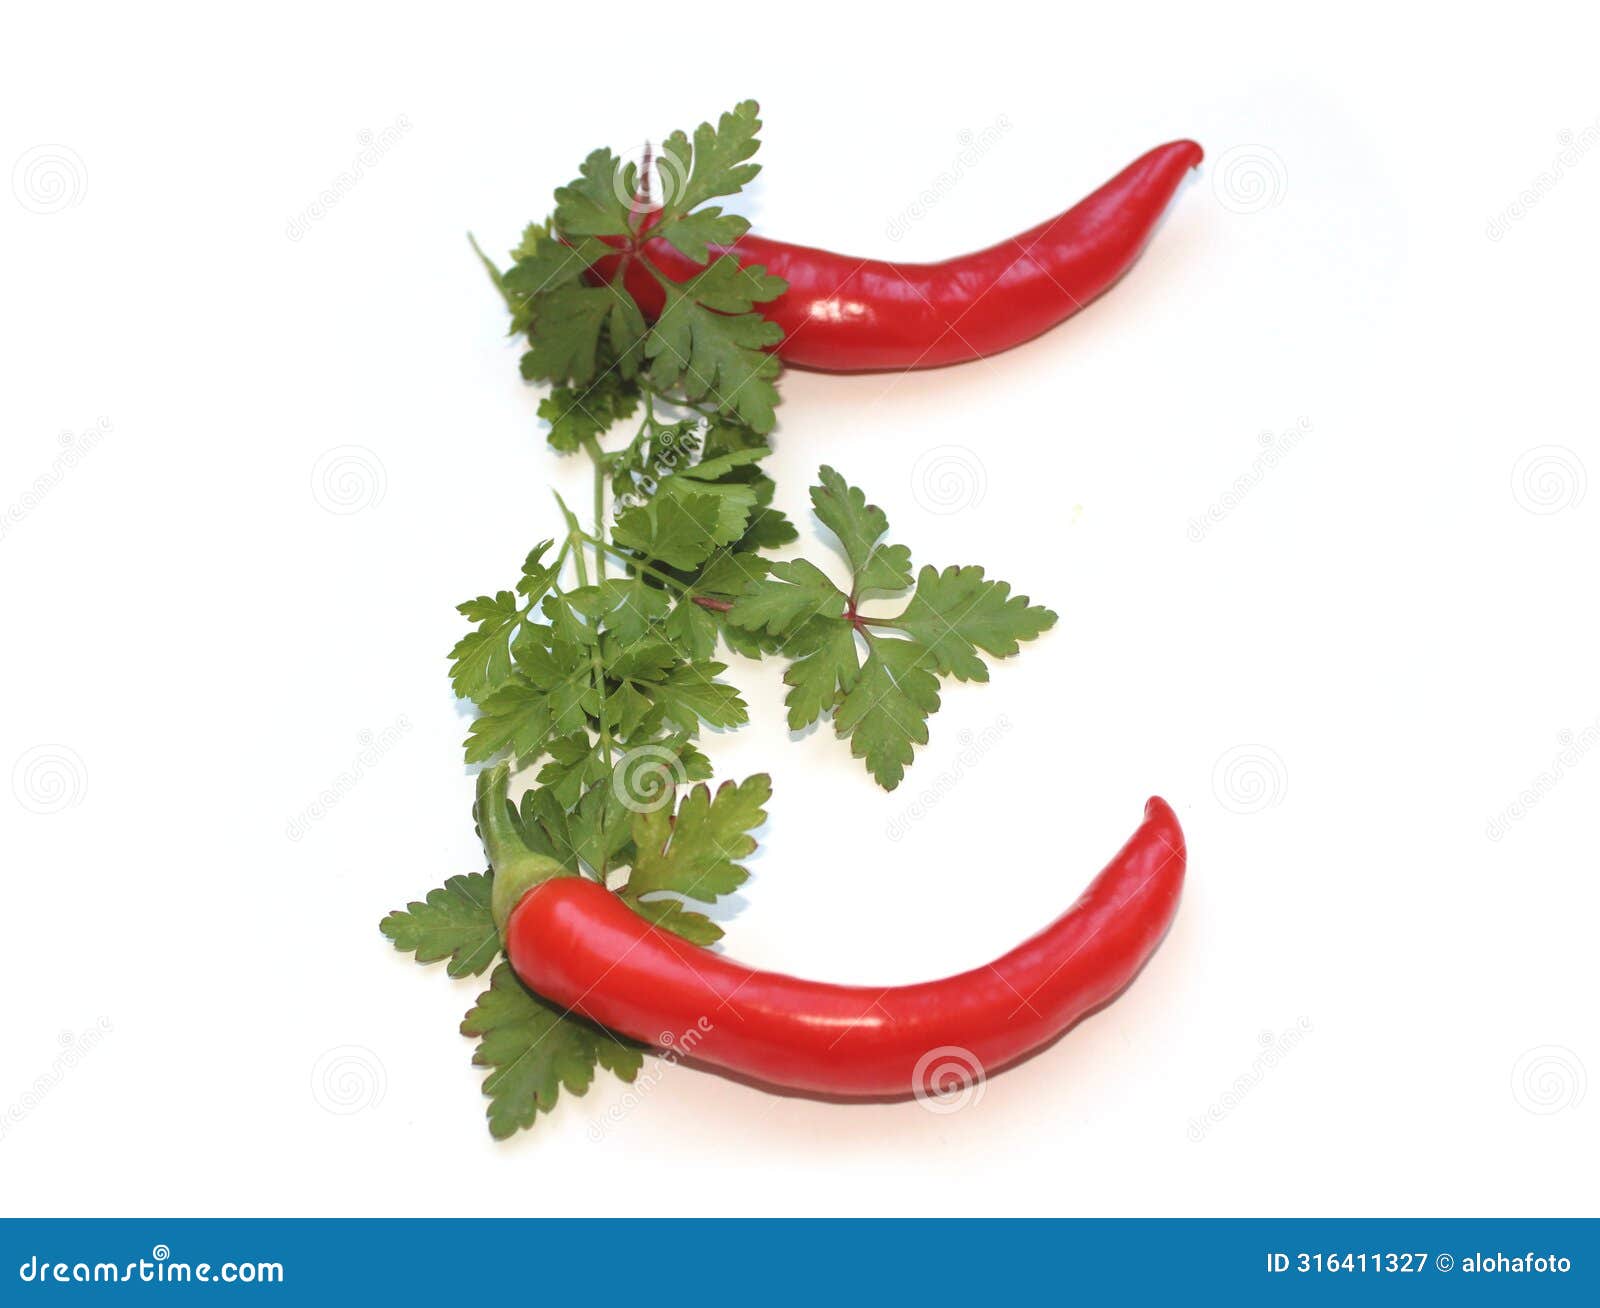 letter e from red chili pepper and green herbs, parsley letter for herb cook book, recipe